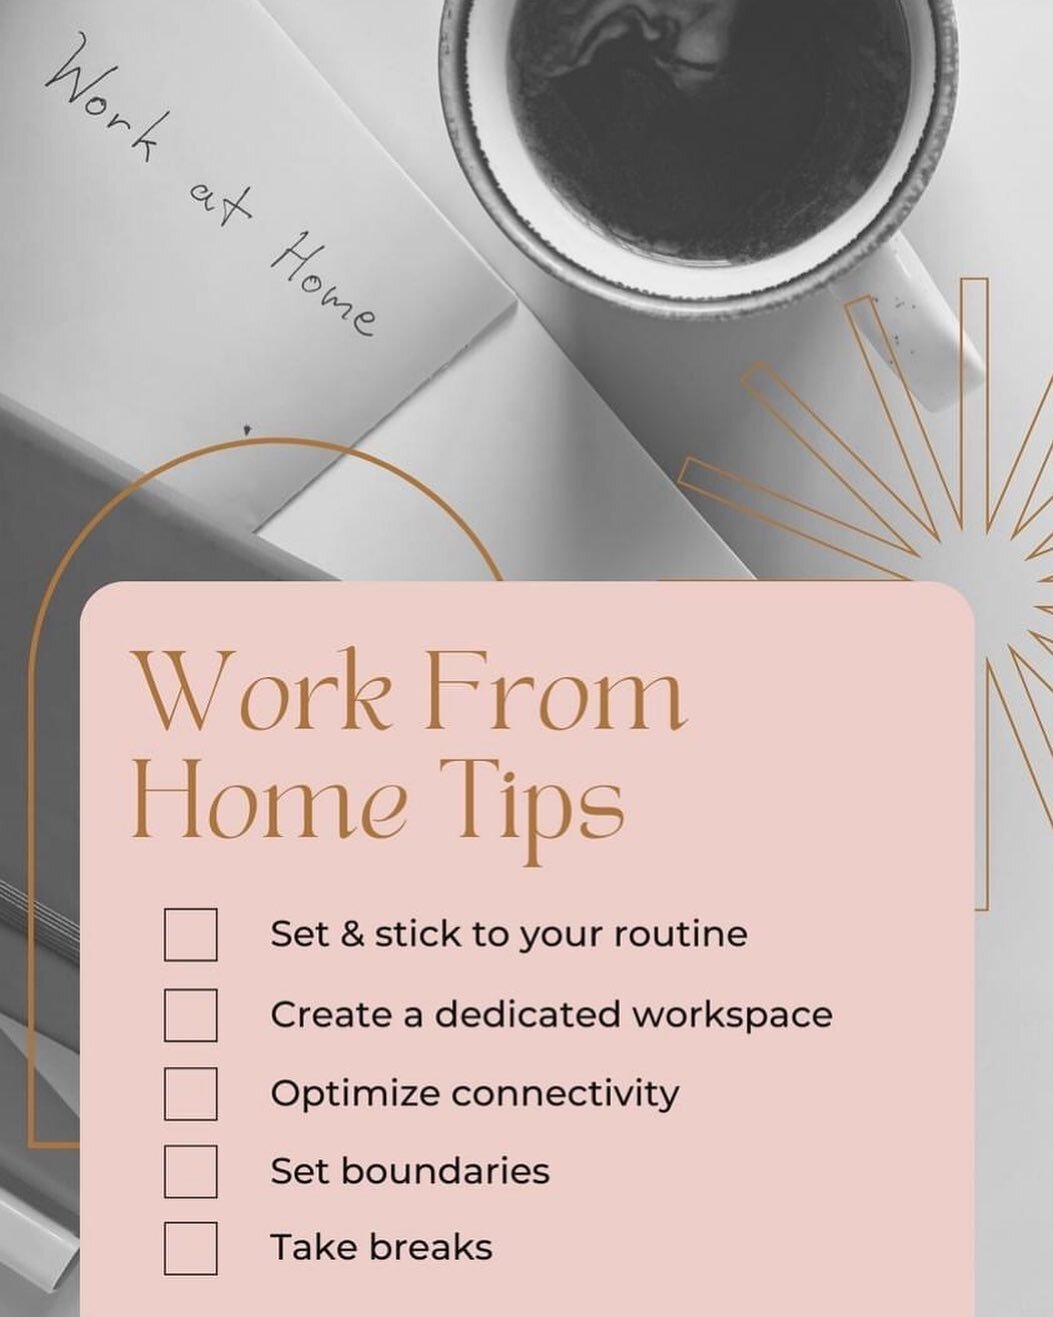 ⚜️Just a few quick tips for anyone working at home or struggling with finding a good fit. ⚜️

#tovieconsulting #tovieconsultinglife #tovieconsultingllc #careercoach #careerdevelopment #careeradvice #careergoals #career #careercoaching #careerchange #